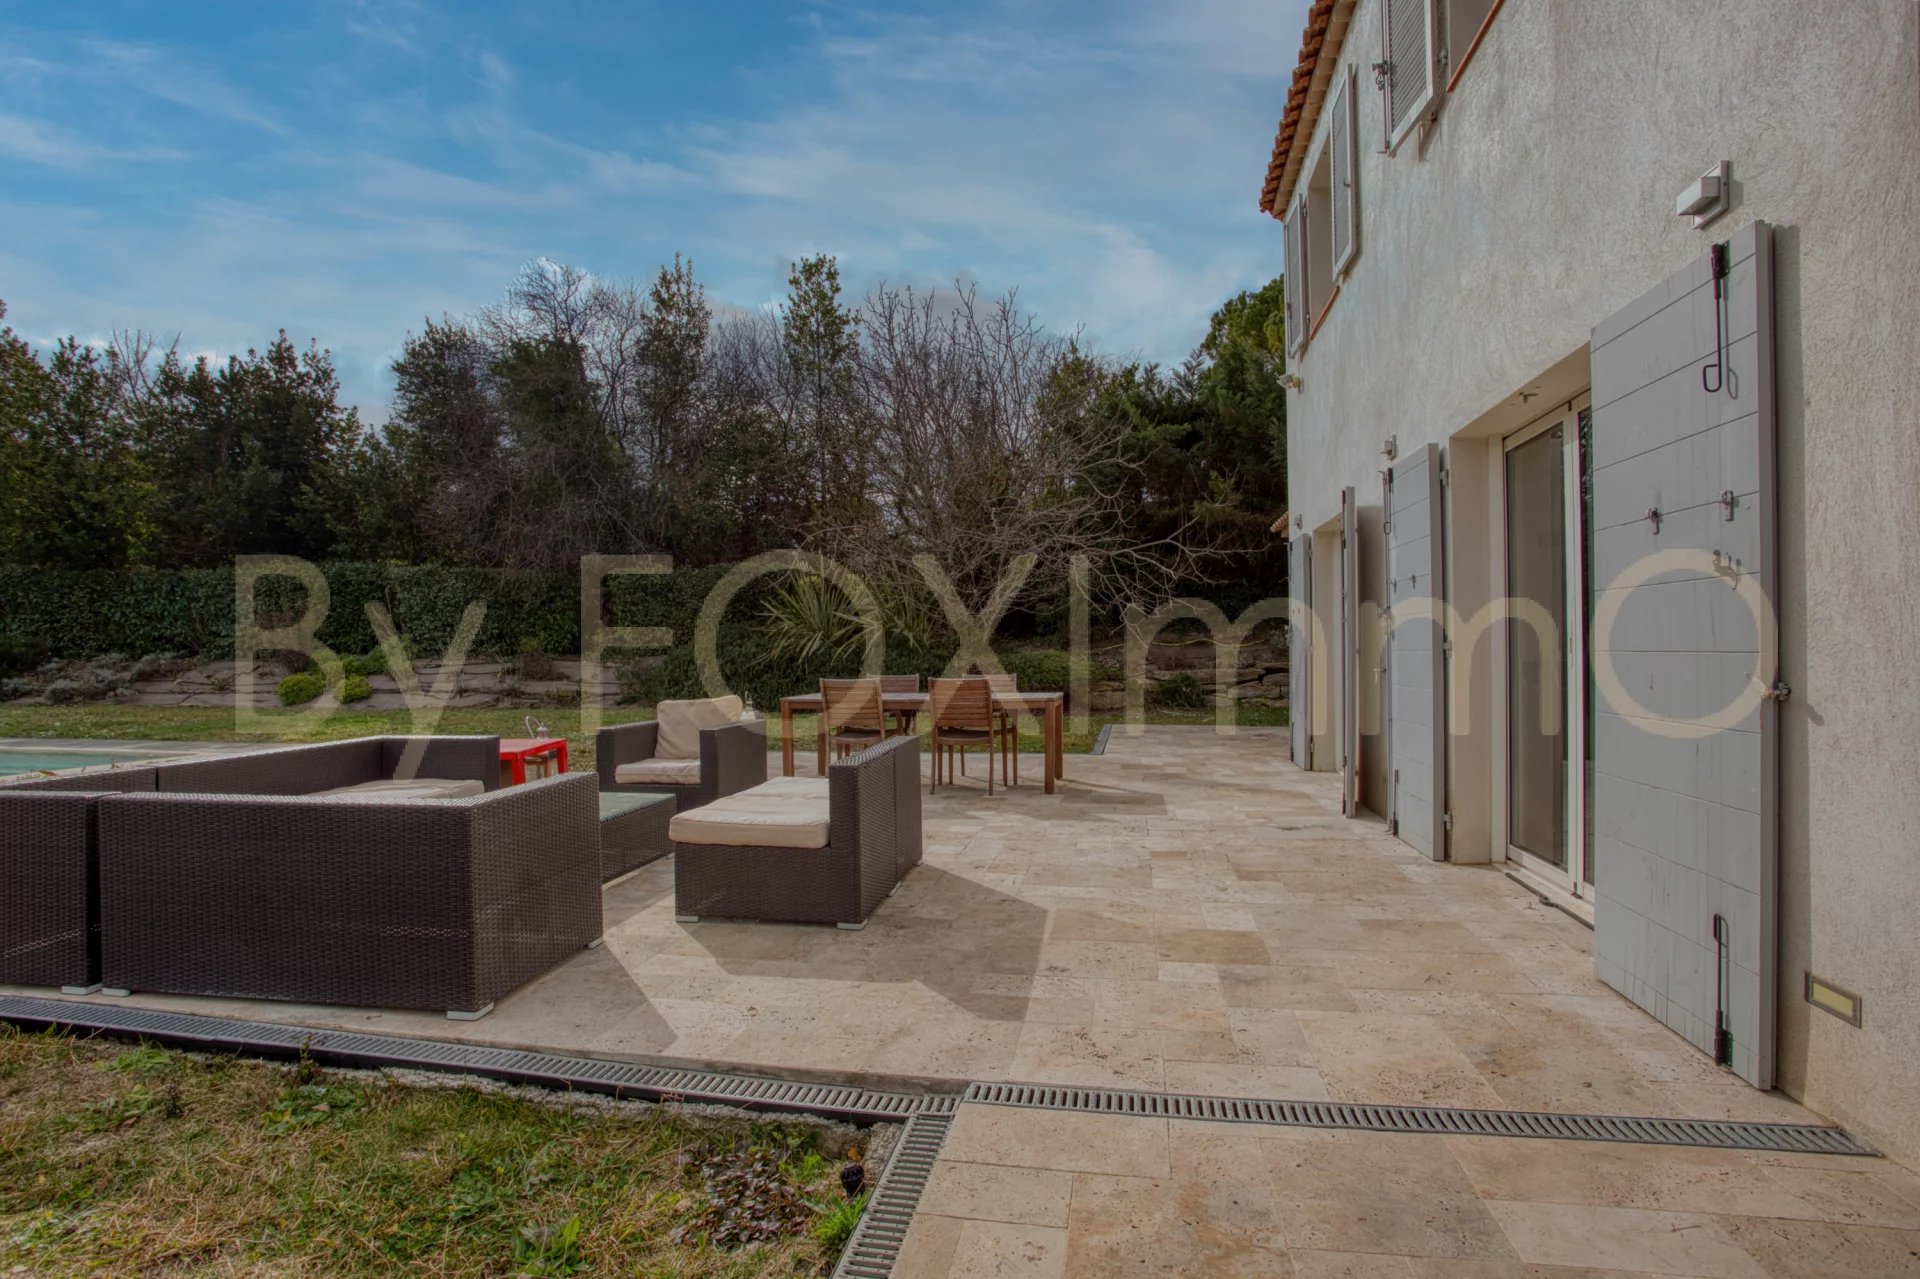 For sale in Côte d'Azur St PAUL /Cagnes, Magnificent new contemporary, Absolute calm, Dominant, Well exposed, Garage pool Flat land